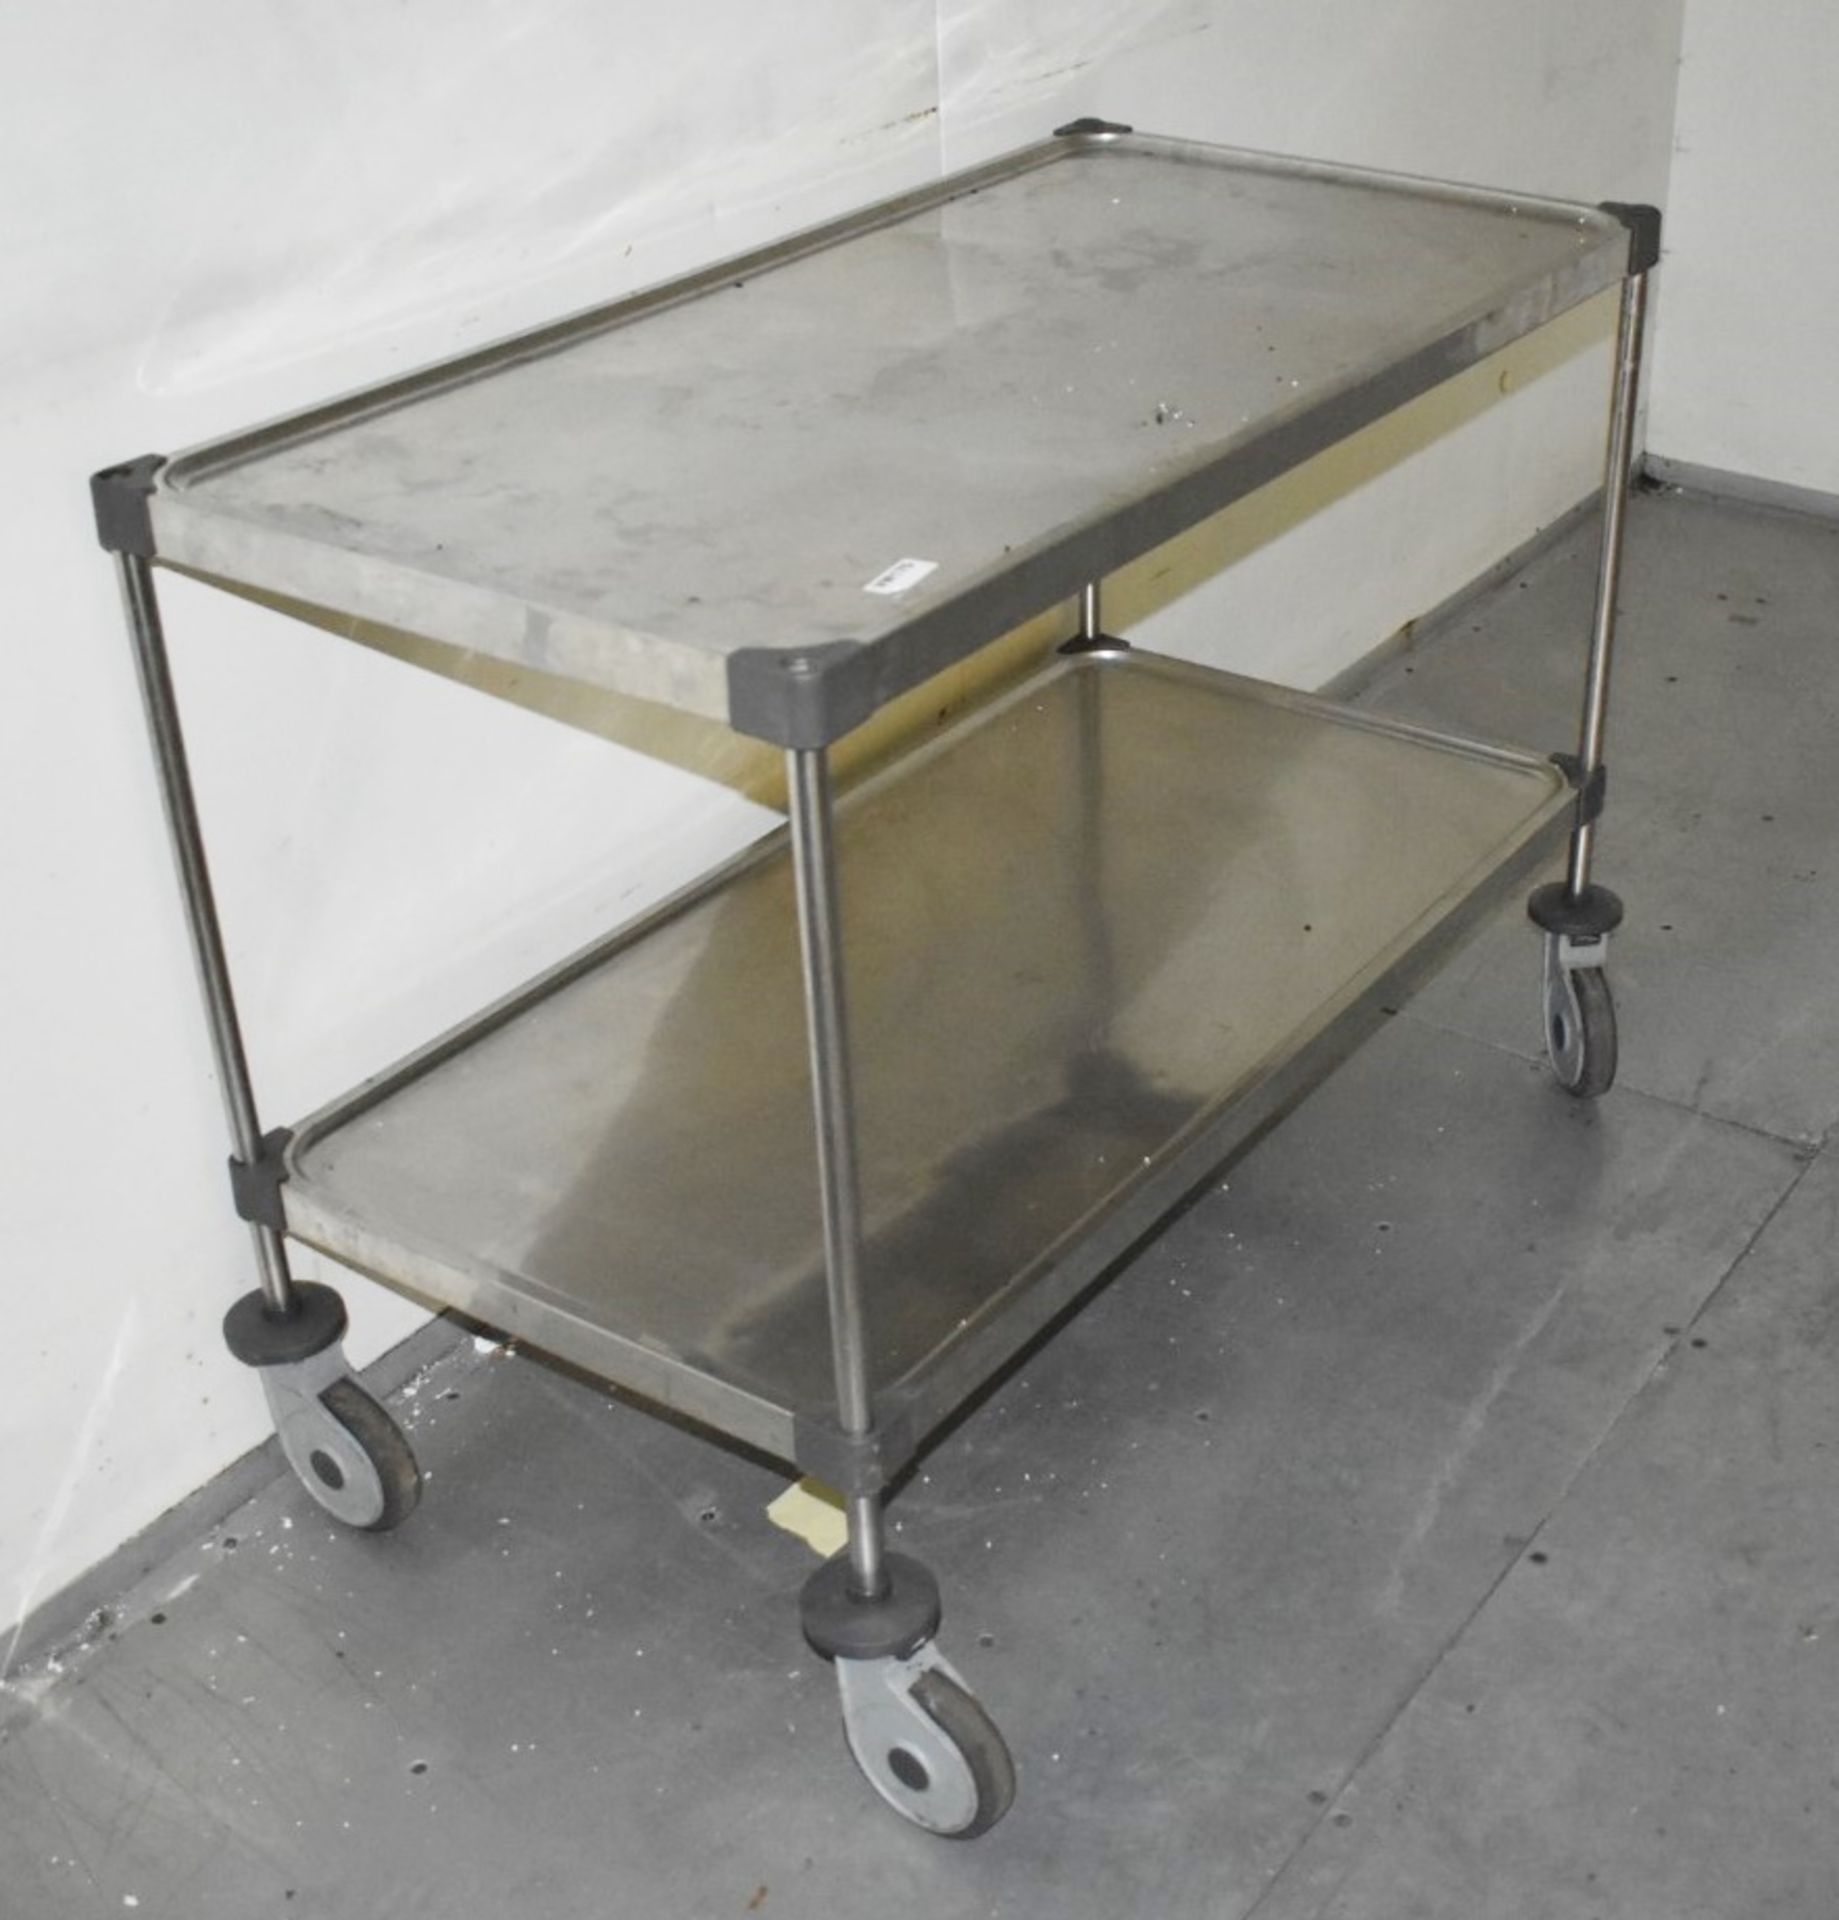 1 x Stainless Steel Prep Bench on Castor Wheels With Undershelf H81 x W108 x D55 cms - Ref VM81 x - Image 3 of 3